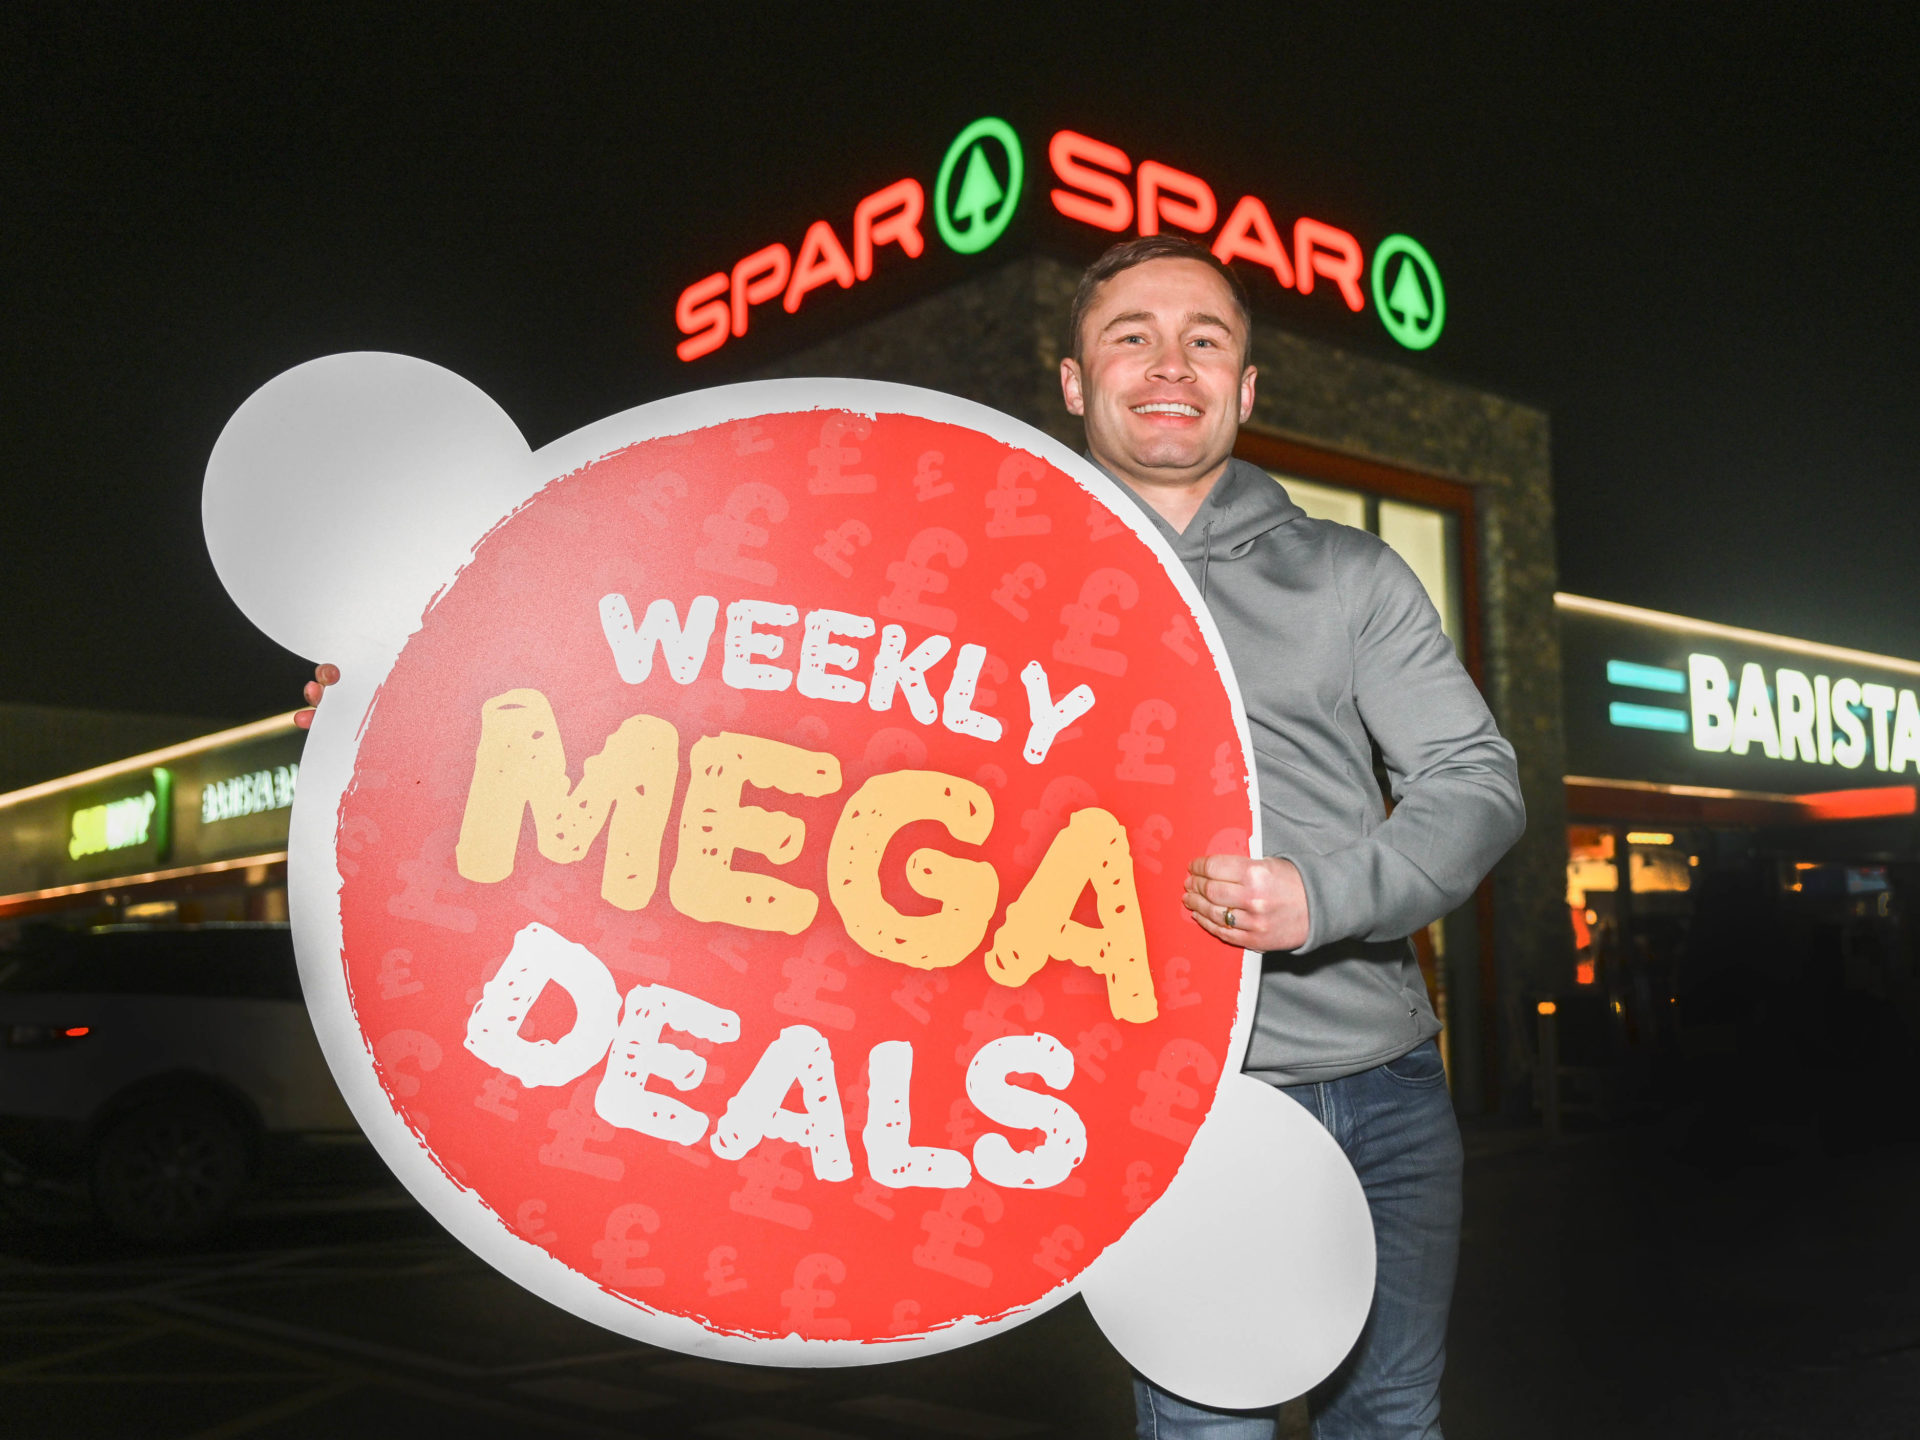 Carl Frampton to promote Henderson Group’s new Mega Deals campaign